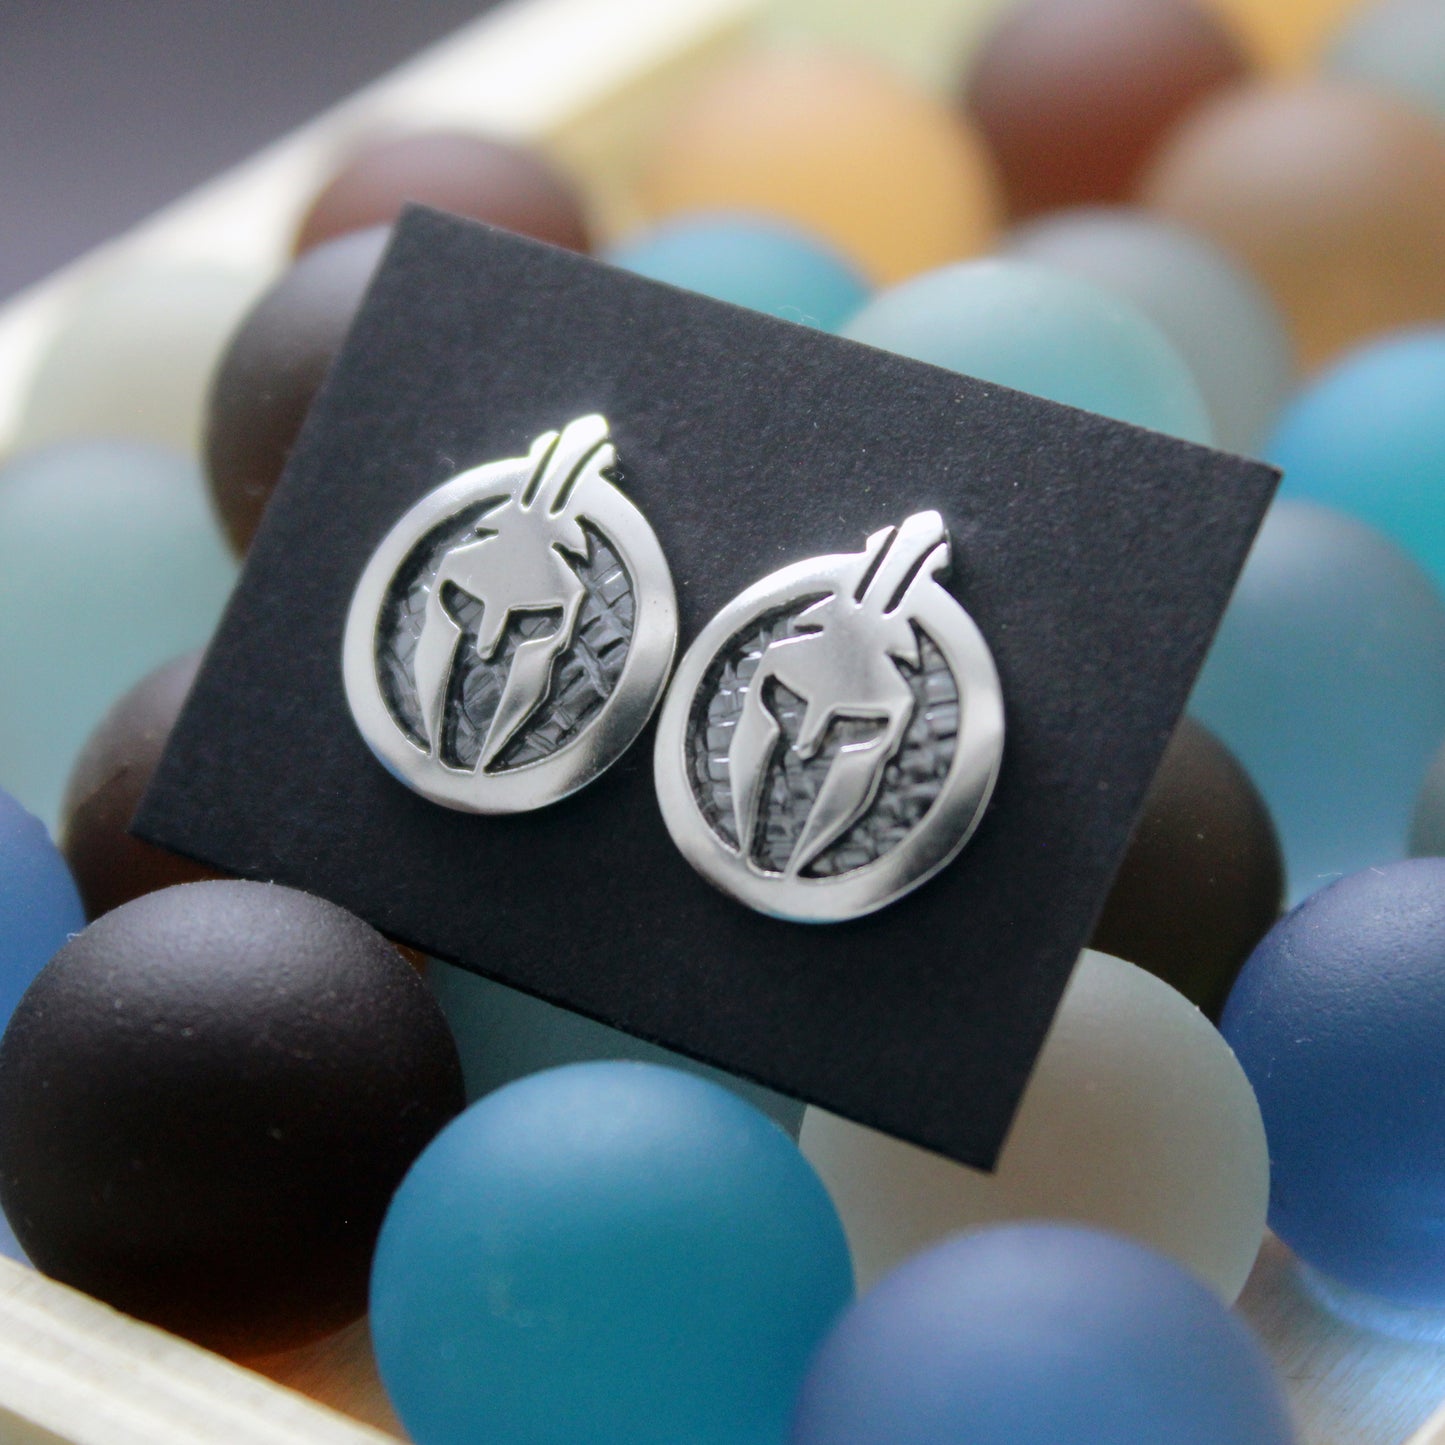 Assassin's Creed Odyssey inspiration earrings in 925 silver